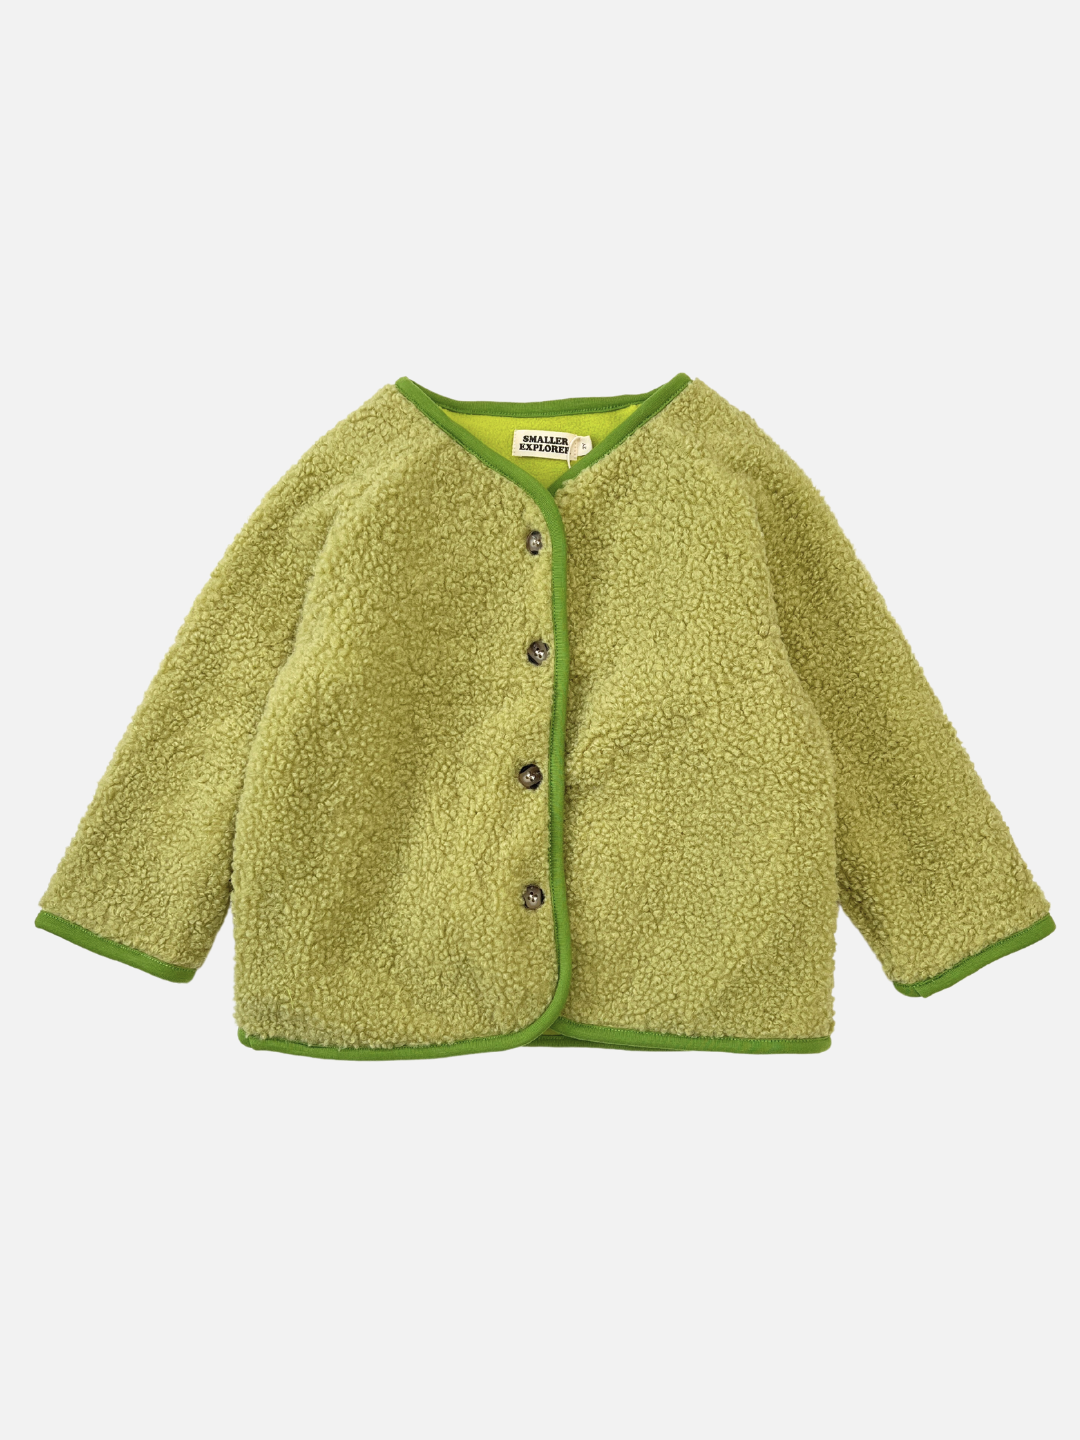 Front view of a kids light green collarless fleece jacket with four brown buttons.